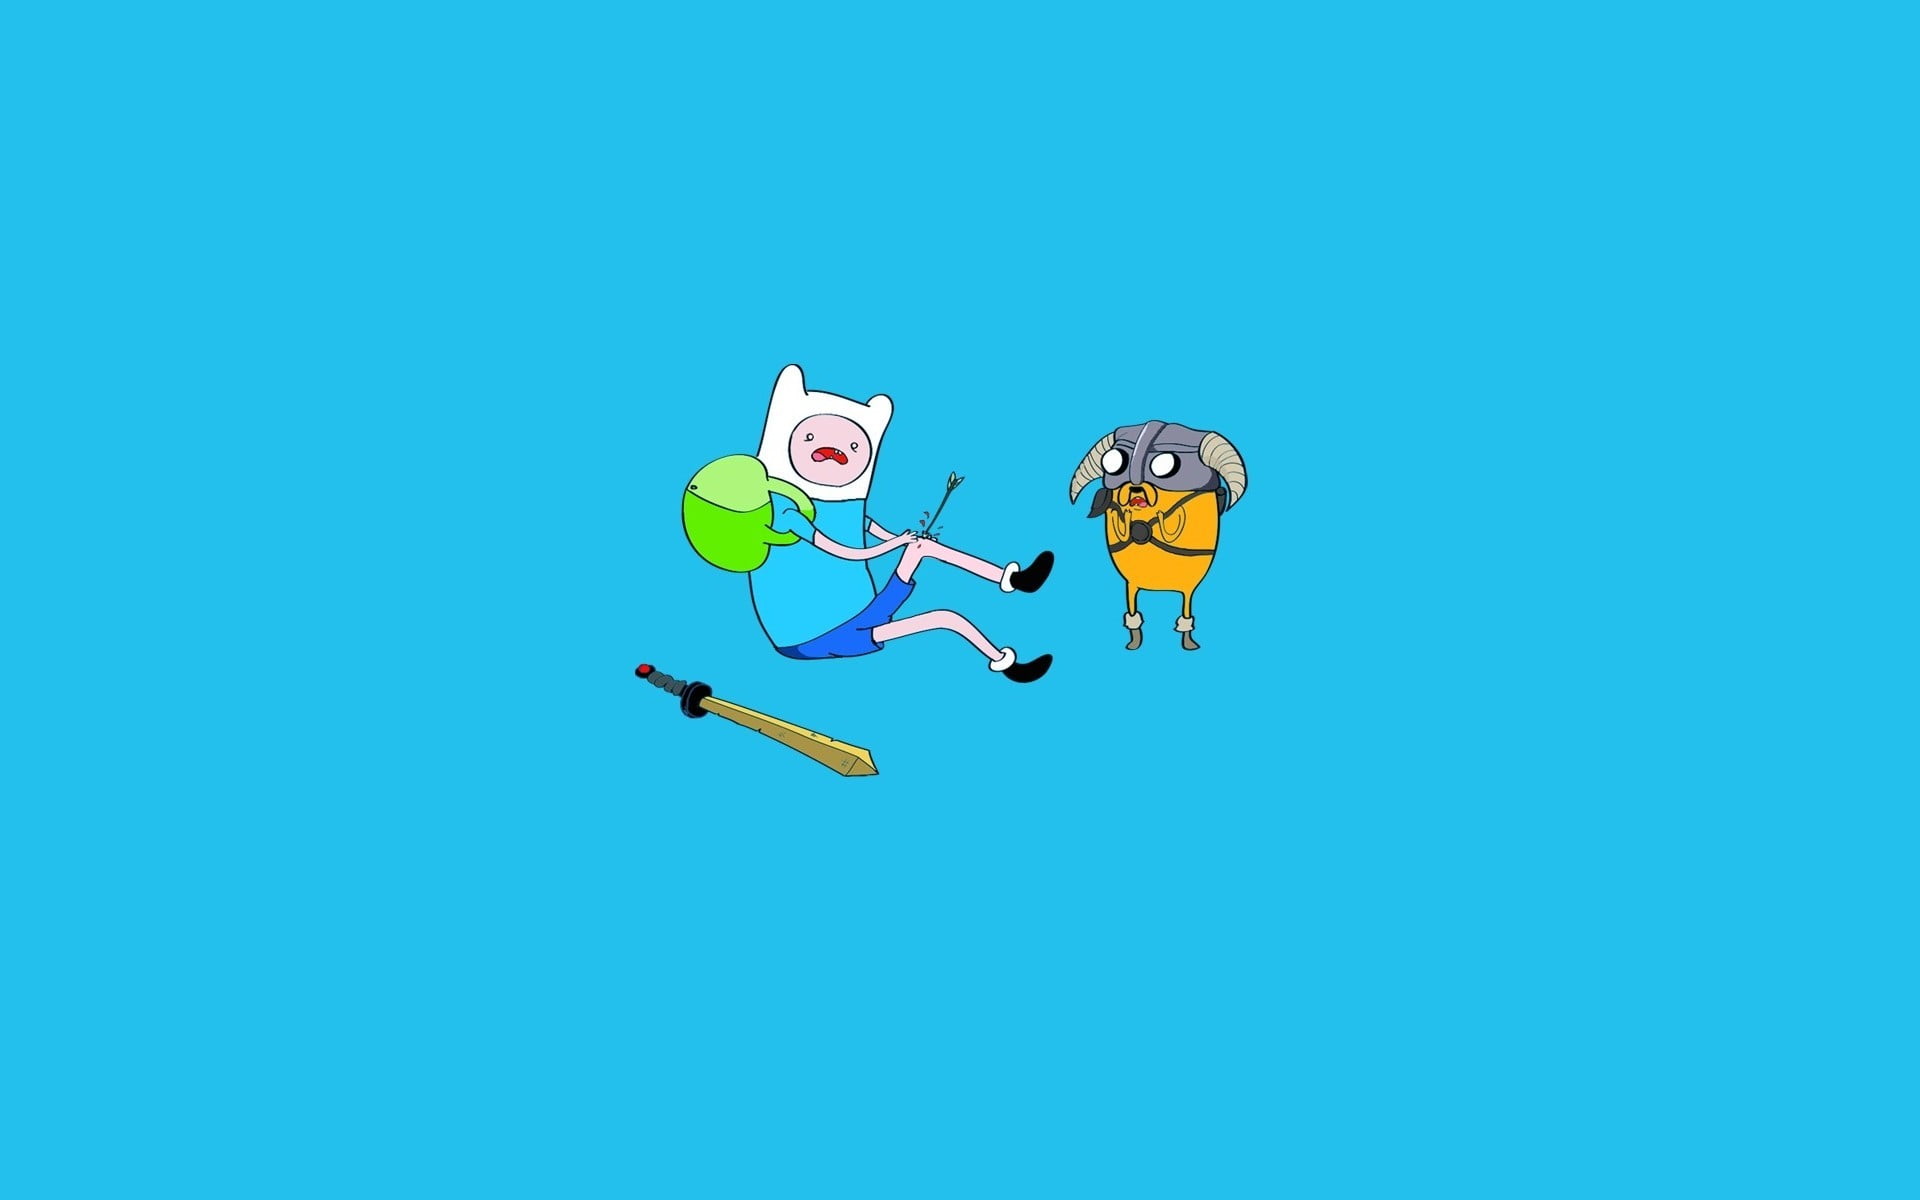 Free Hd Wallpapers Adventure Time - 1920x1200 Wallpaper 